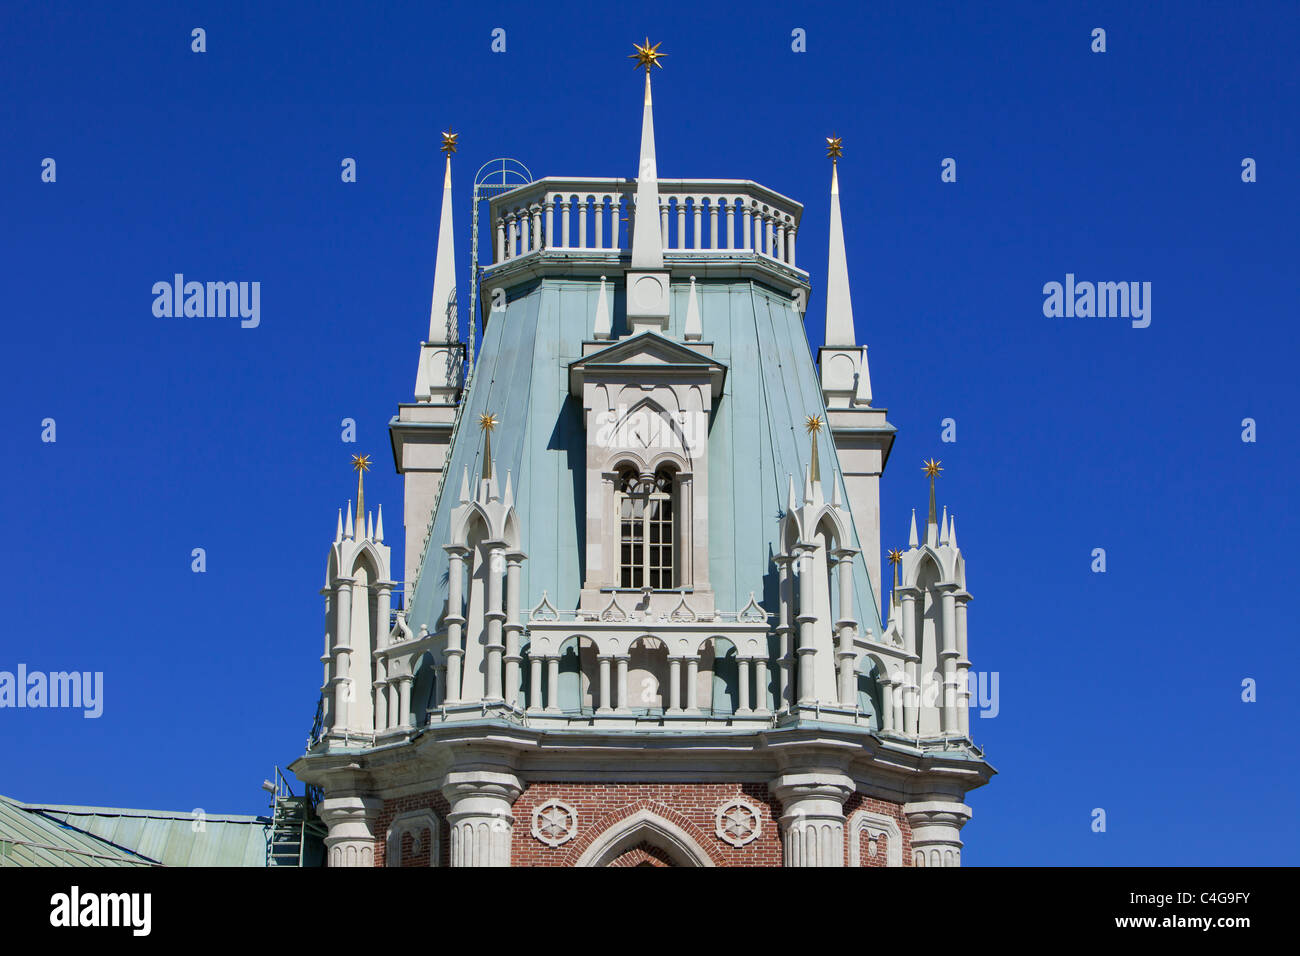 Close-up of one of the towers of the 18th century Neo-Gothic (Gothic Revival) Tsaritsyno Palace in Moscow, Russia Stock Photo